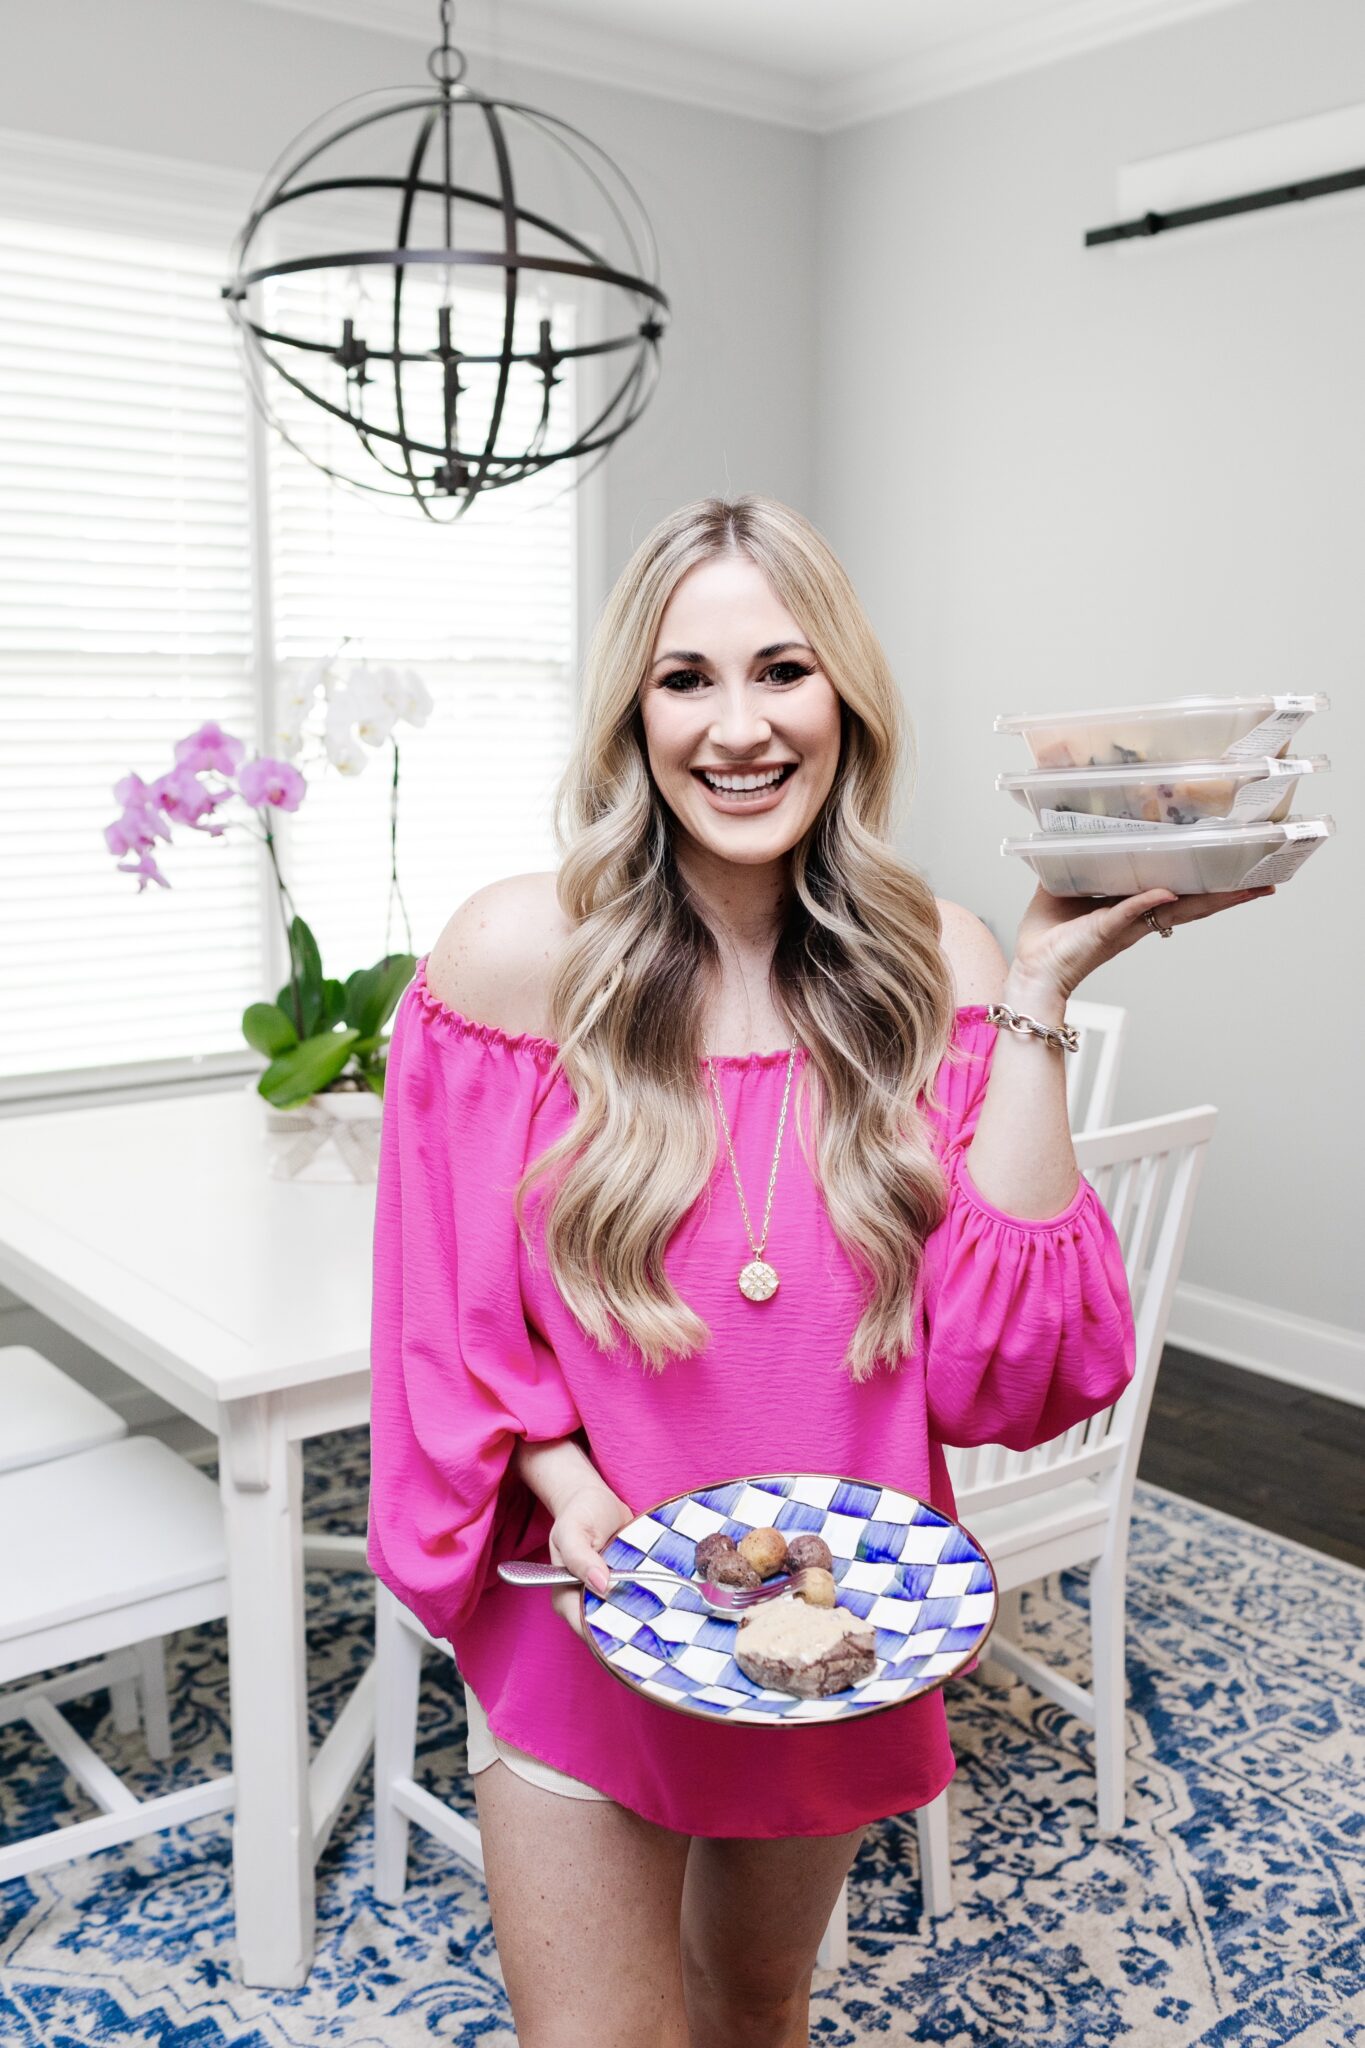 Best Healthy Summer Snacks featured by top Memphis lifestyle blogger, Walking in MBest Healthy Summer Snacks featured by top Memphis lifestyle blogger, Walking in Memphis in High Heels.emphis in High Heels.